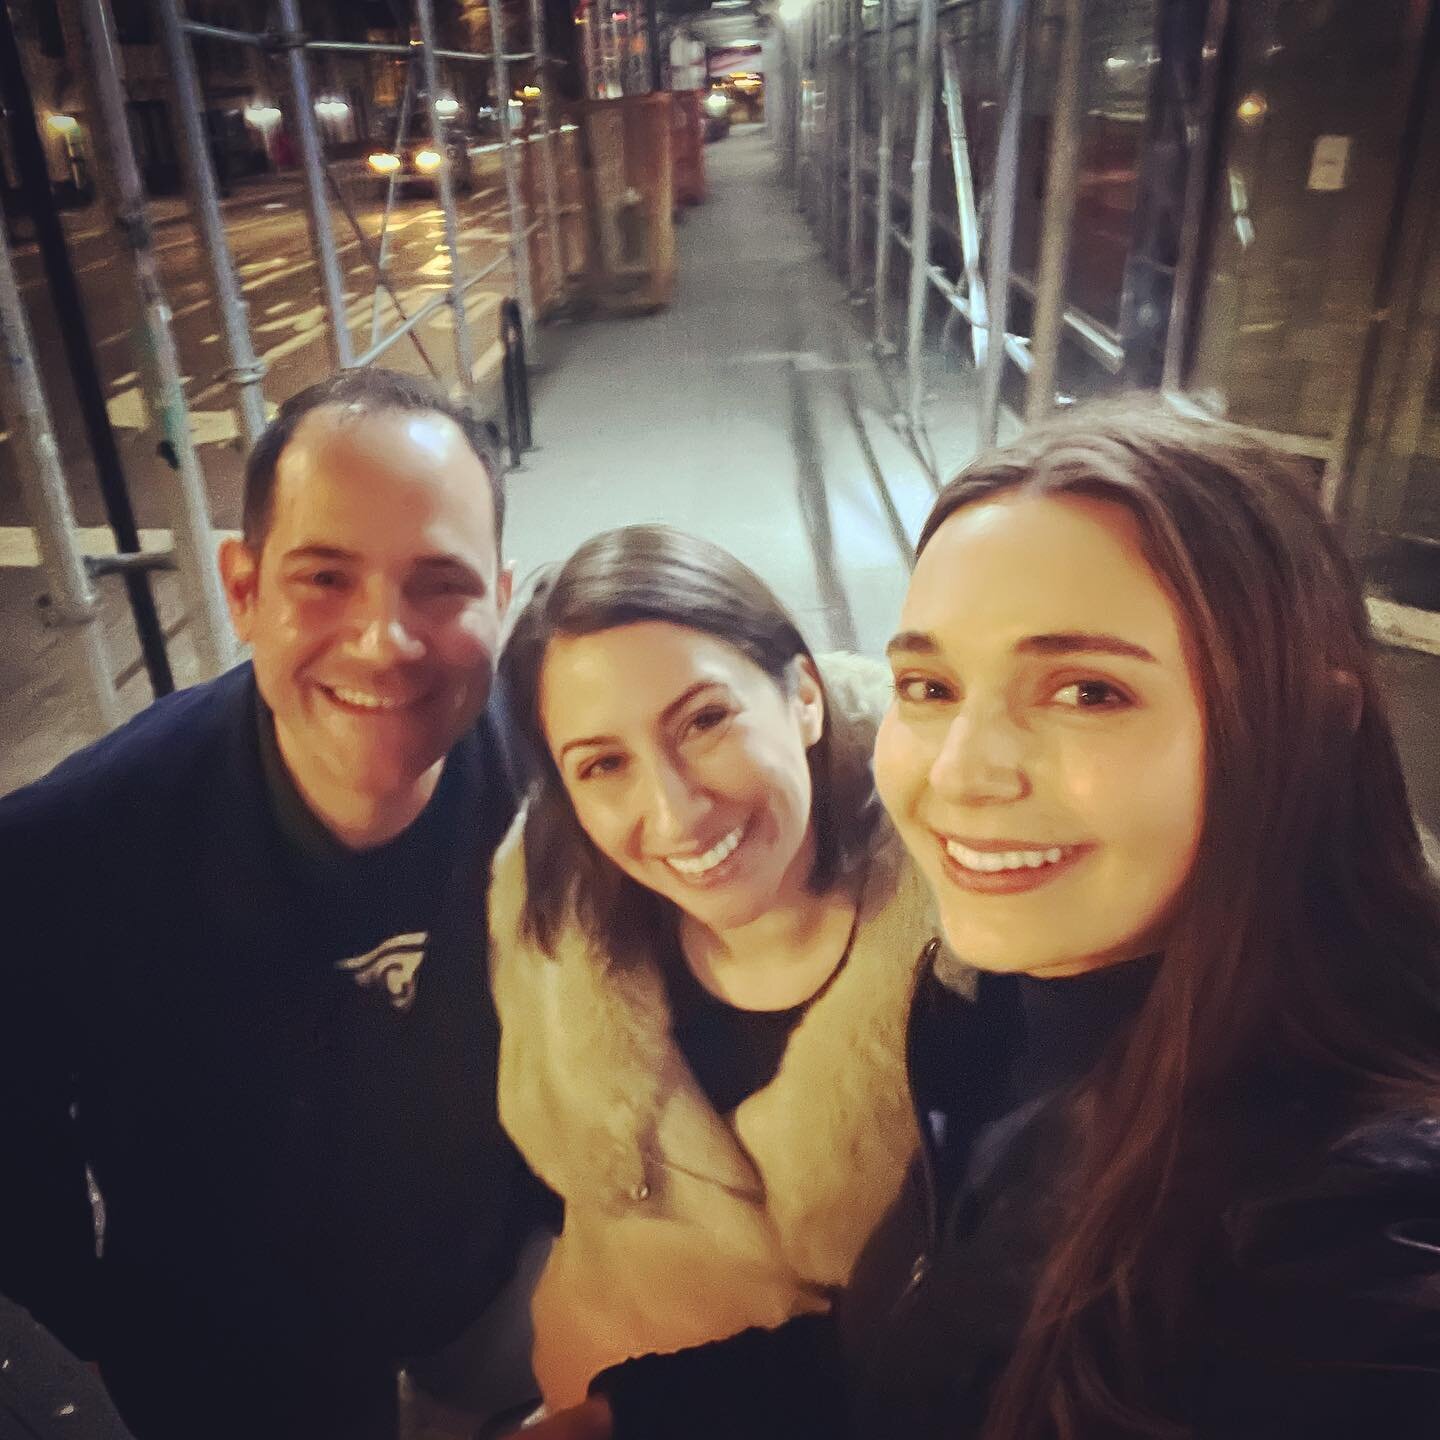 TEAM GERALDINE (NY). After almost two years of working on &ldquo;Geraldine&rdquo; so closely with Natasha (and one year of grad school where she teaches!) we had never met in person until now. #differenttimes What a nice way to wind down this stage a